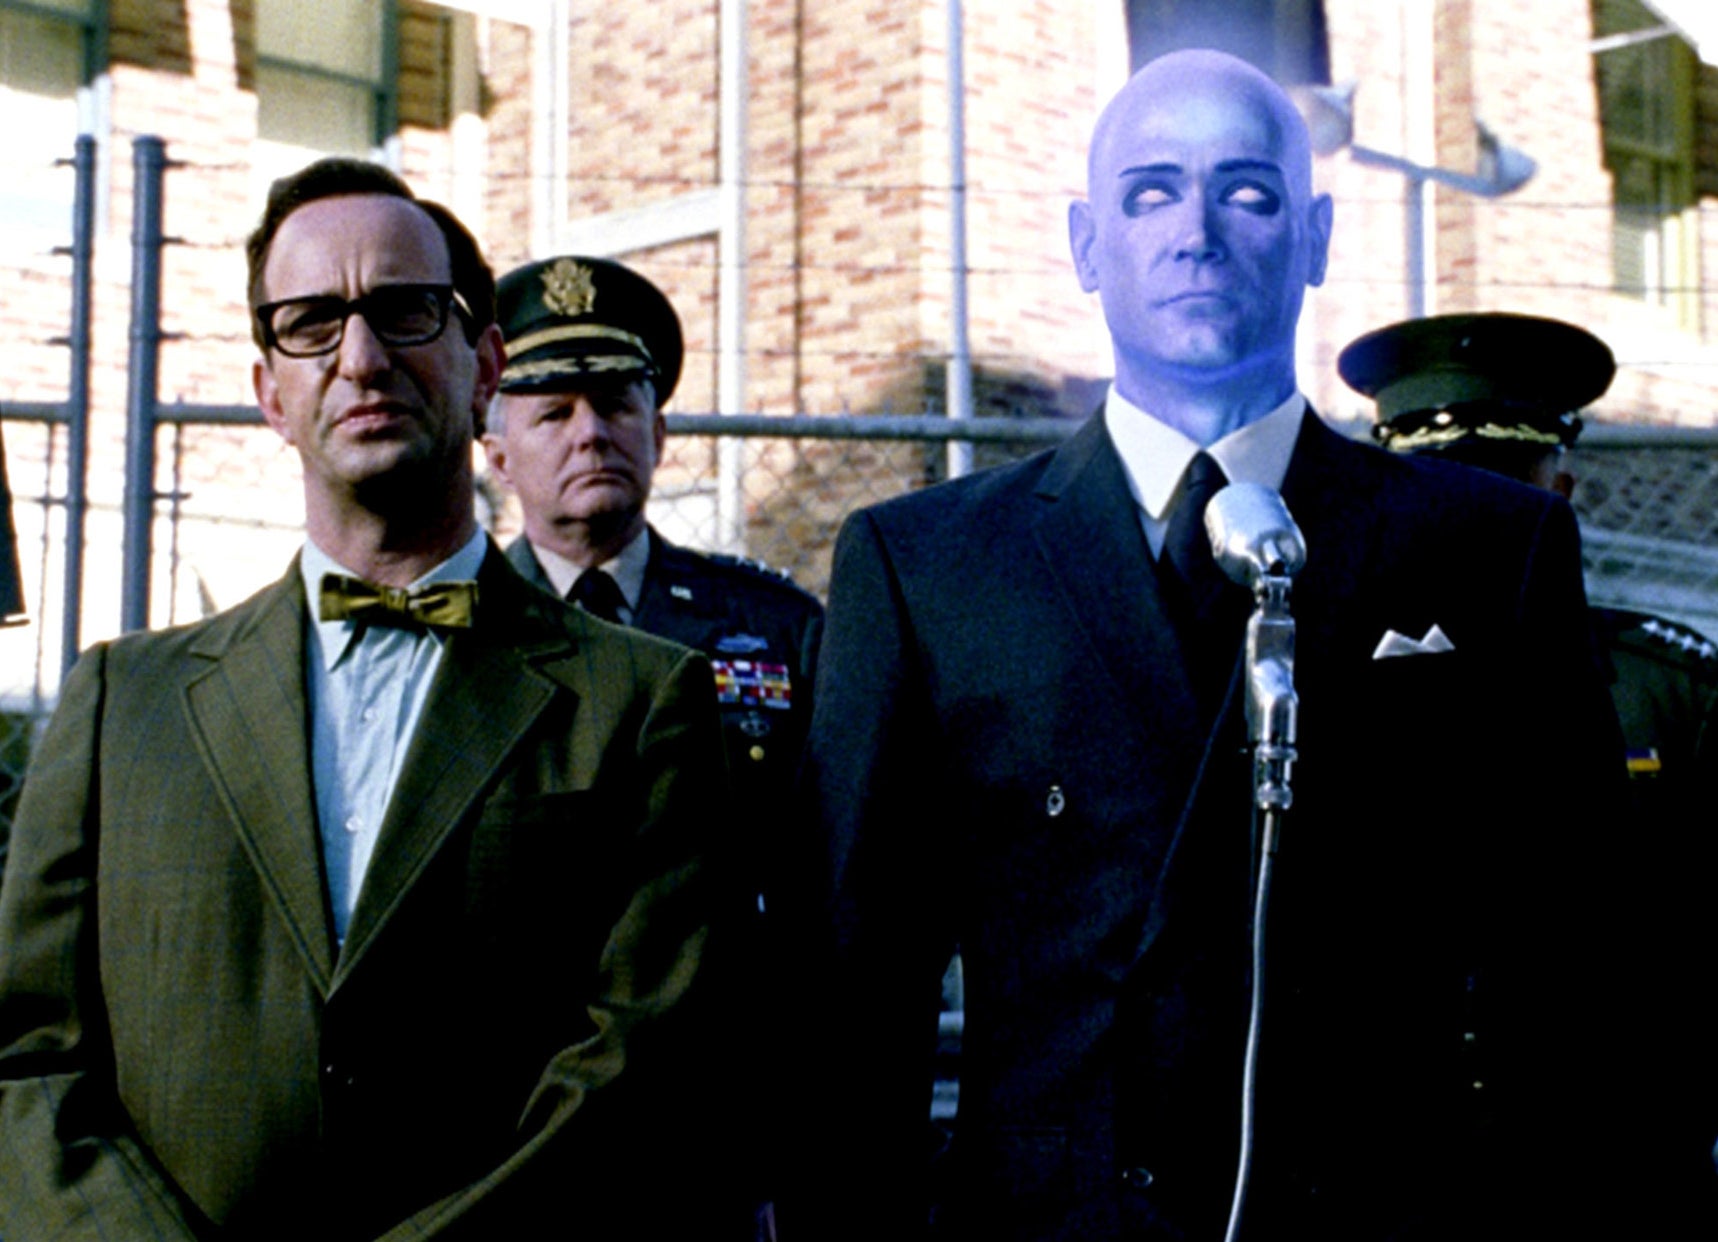 blue, glowing Dr. Manhattan standing at a press conference in watchmen